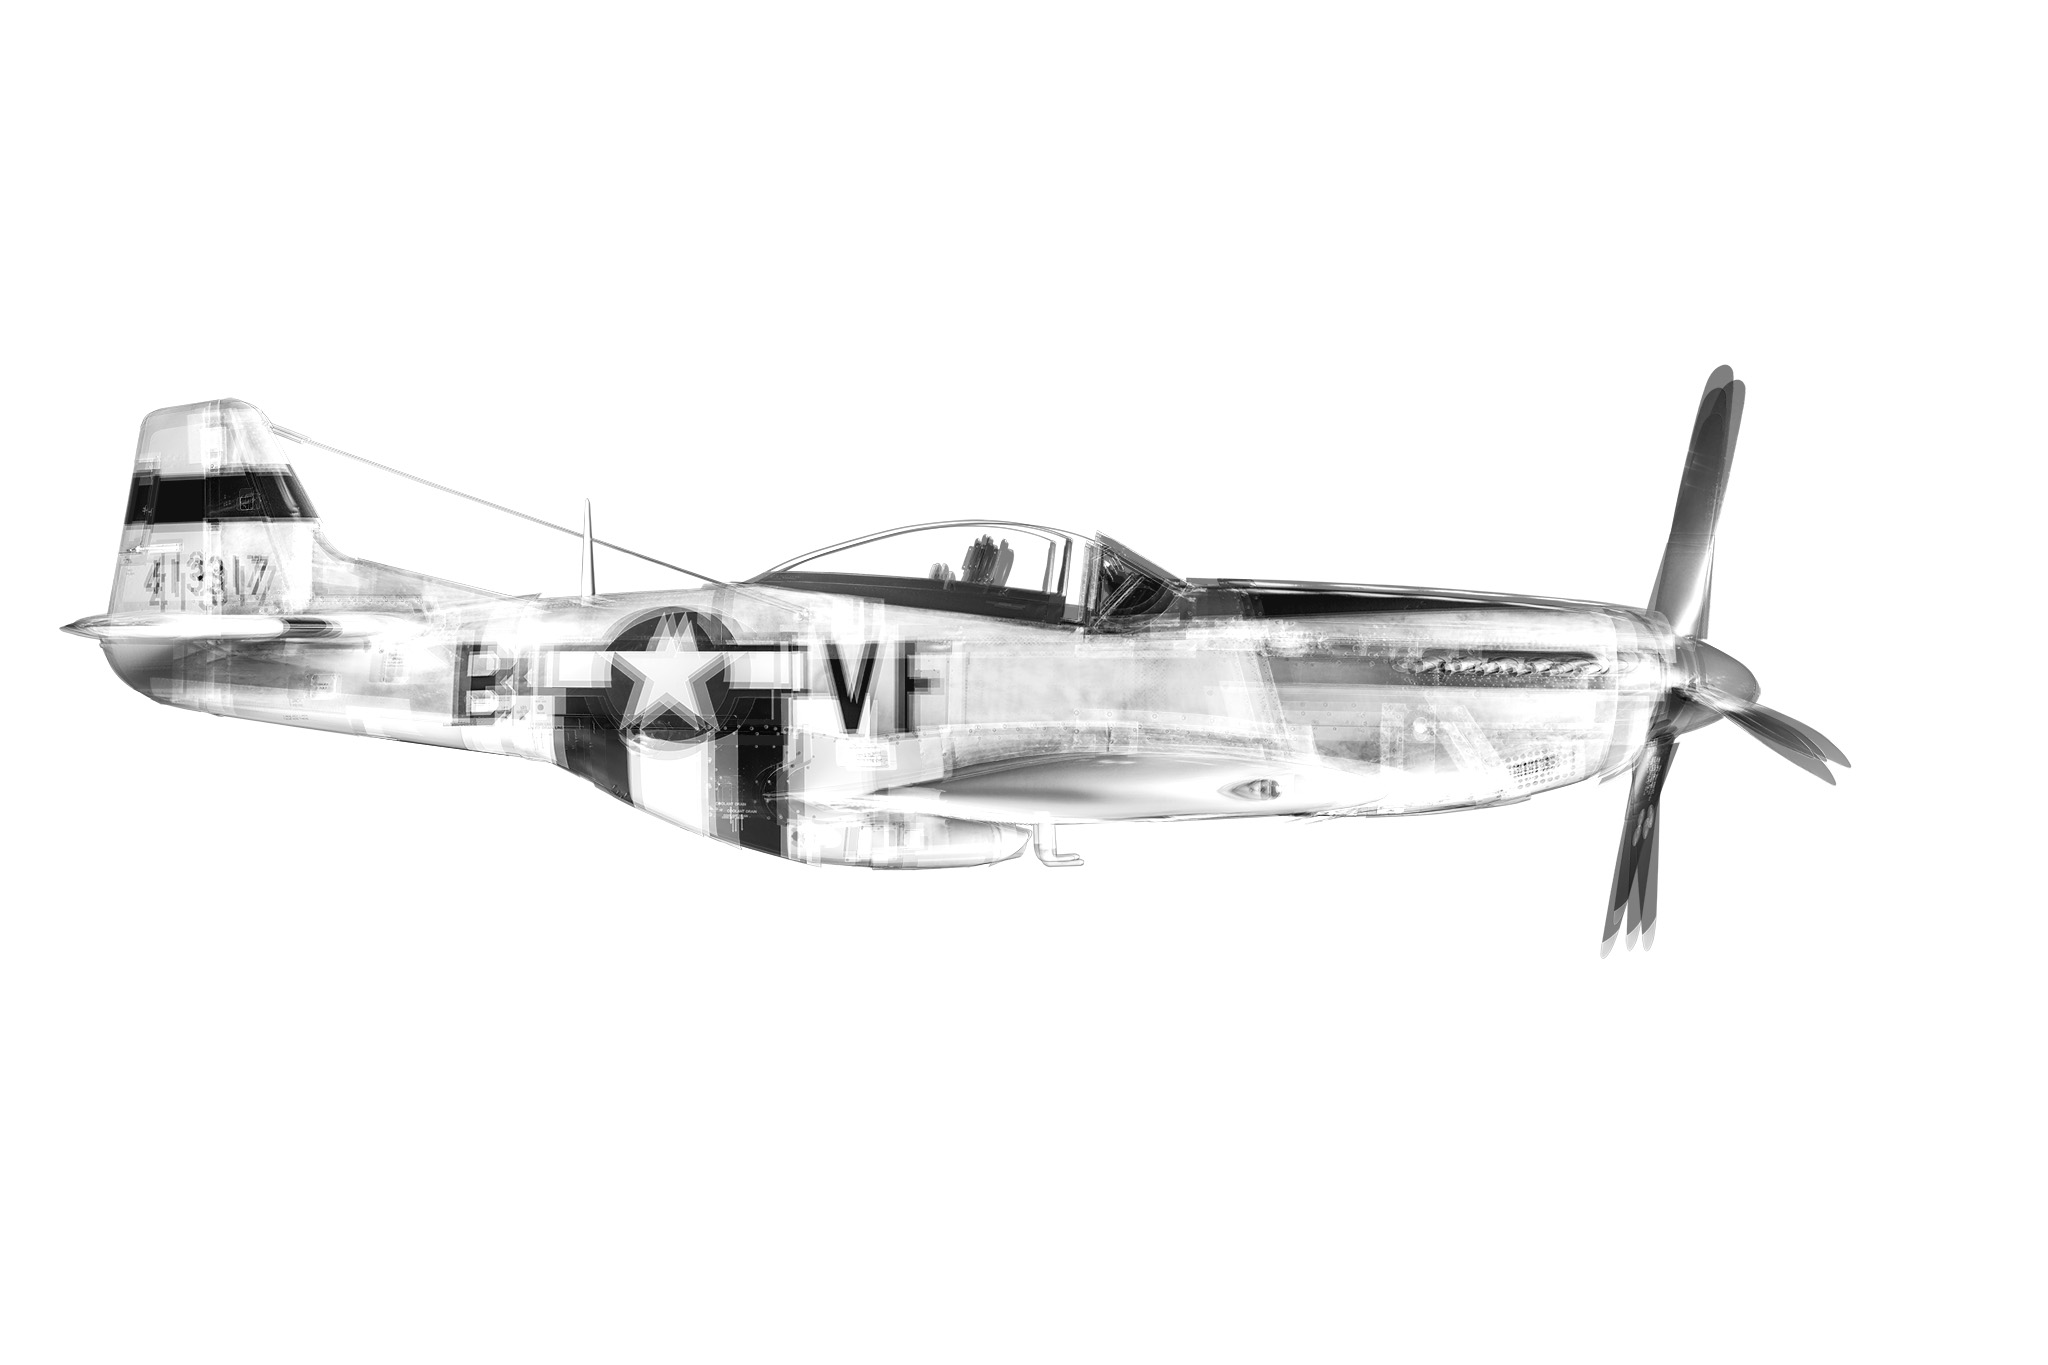 Black and white composite photograph of an American P51 Mustang